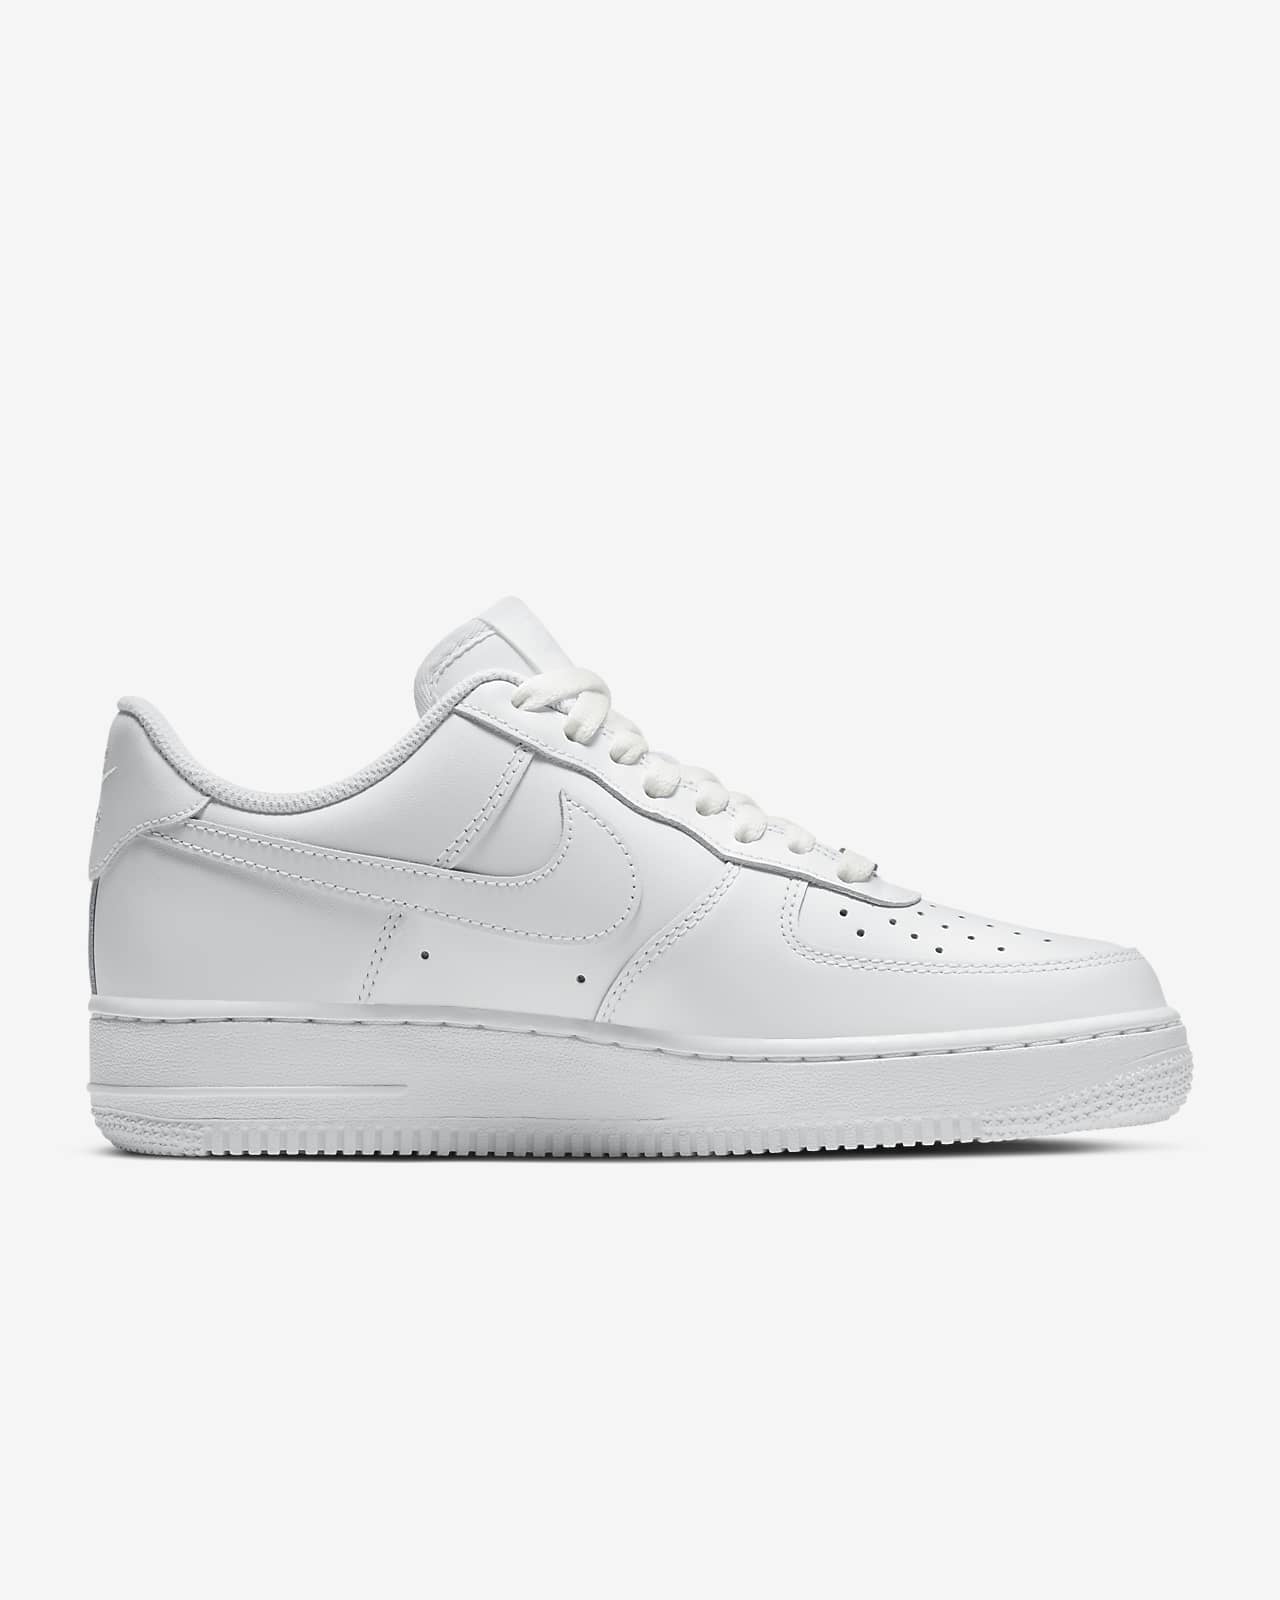 nike air force 1 07 womens size 9